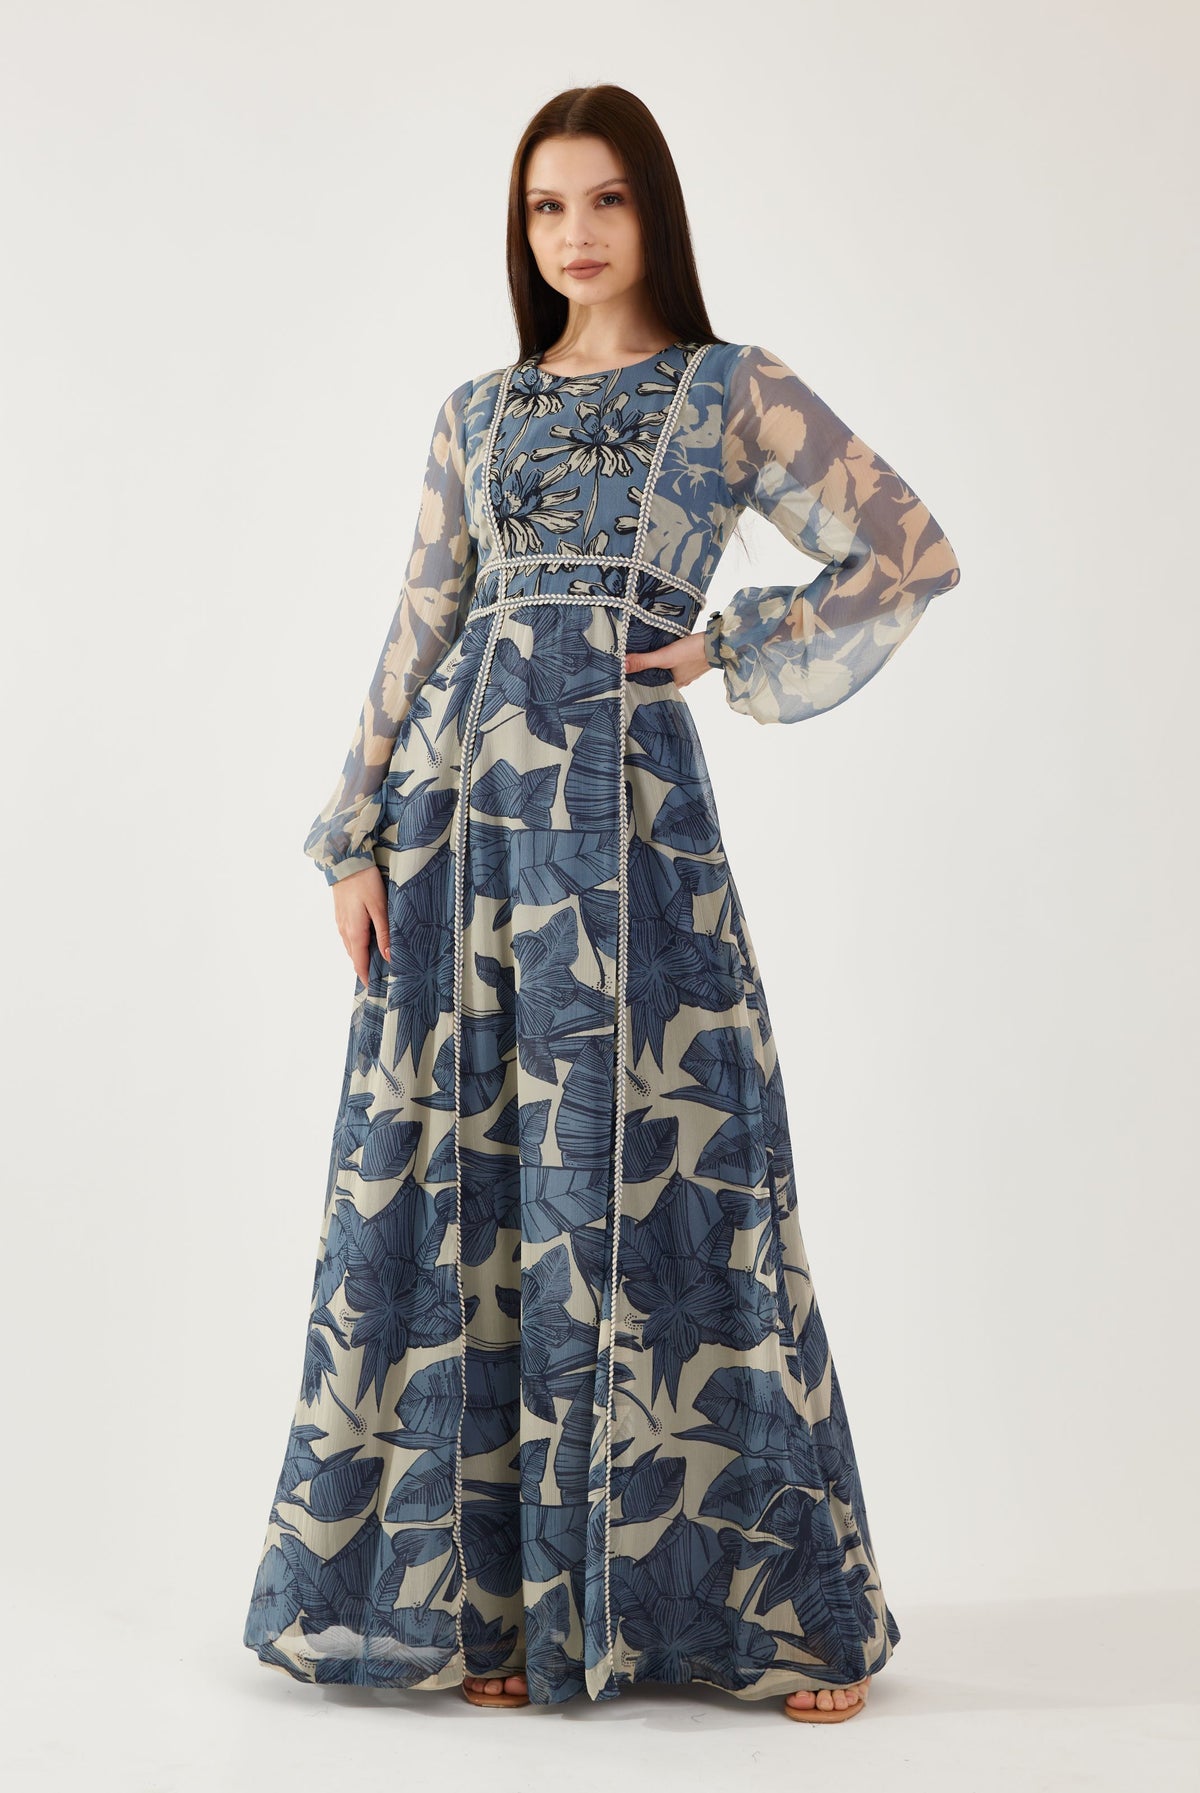 BLUE AND CREAM FLORAL EMBROIDERED KAFTAN DRESS